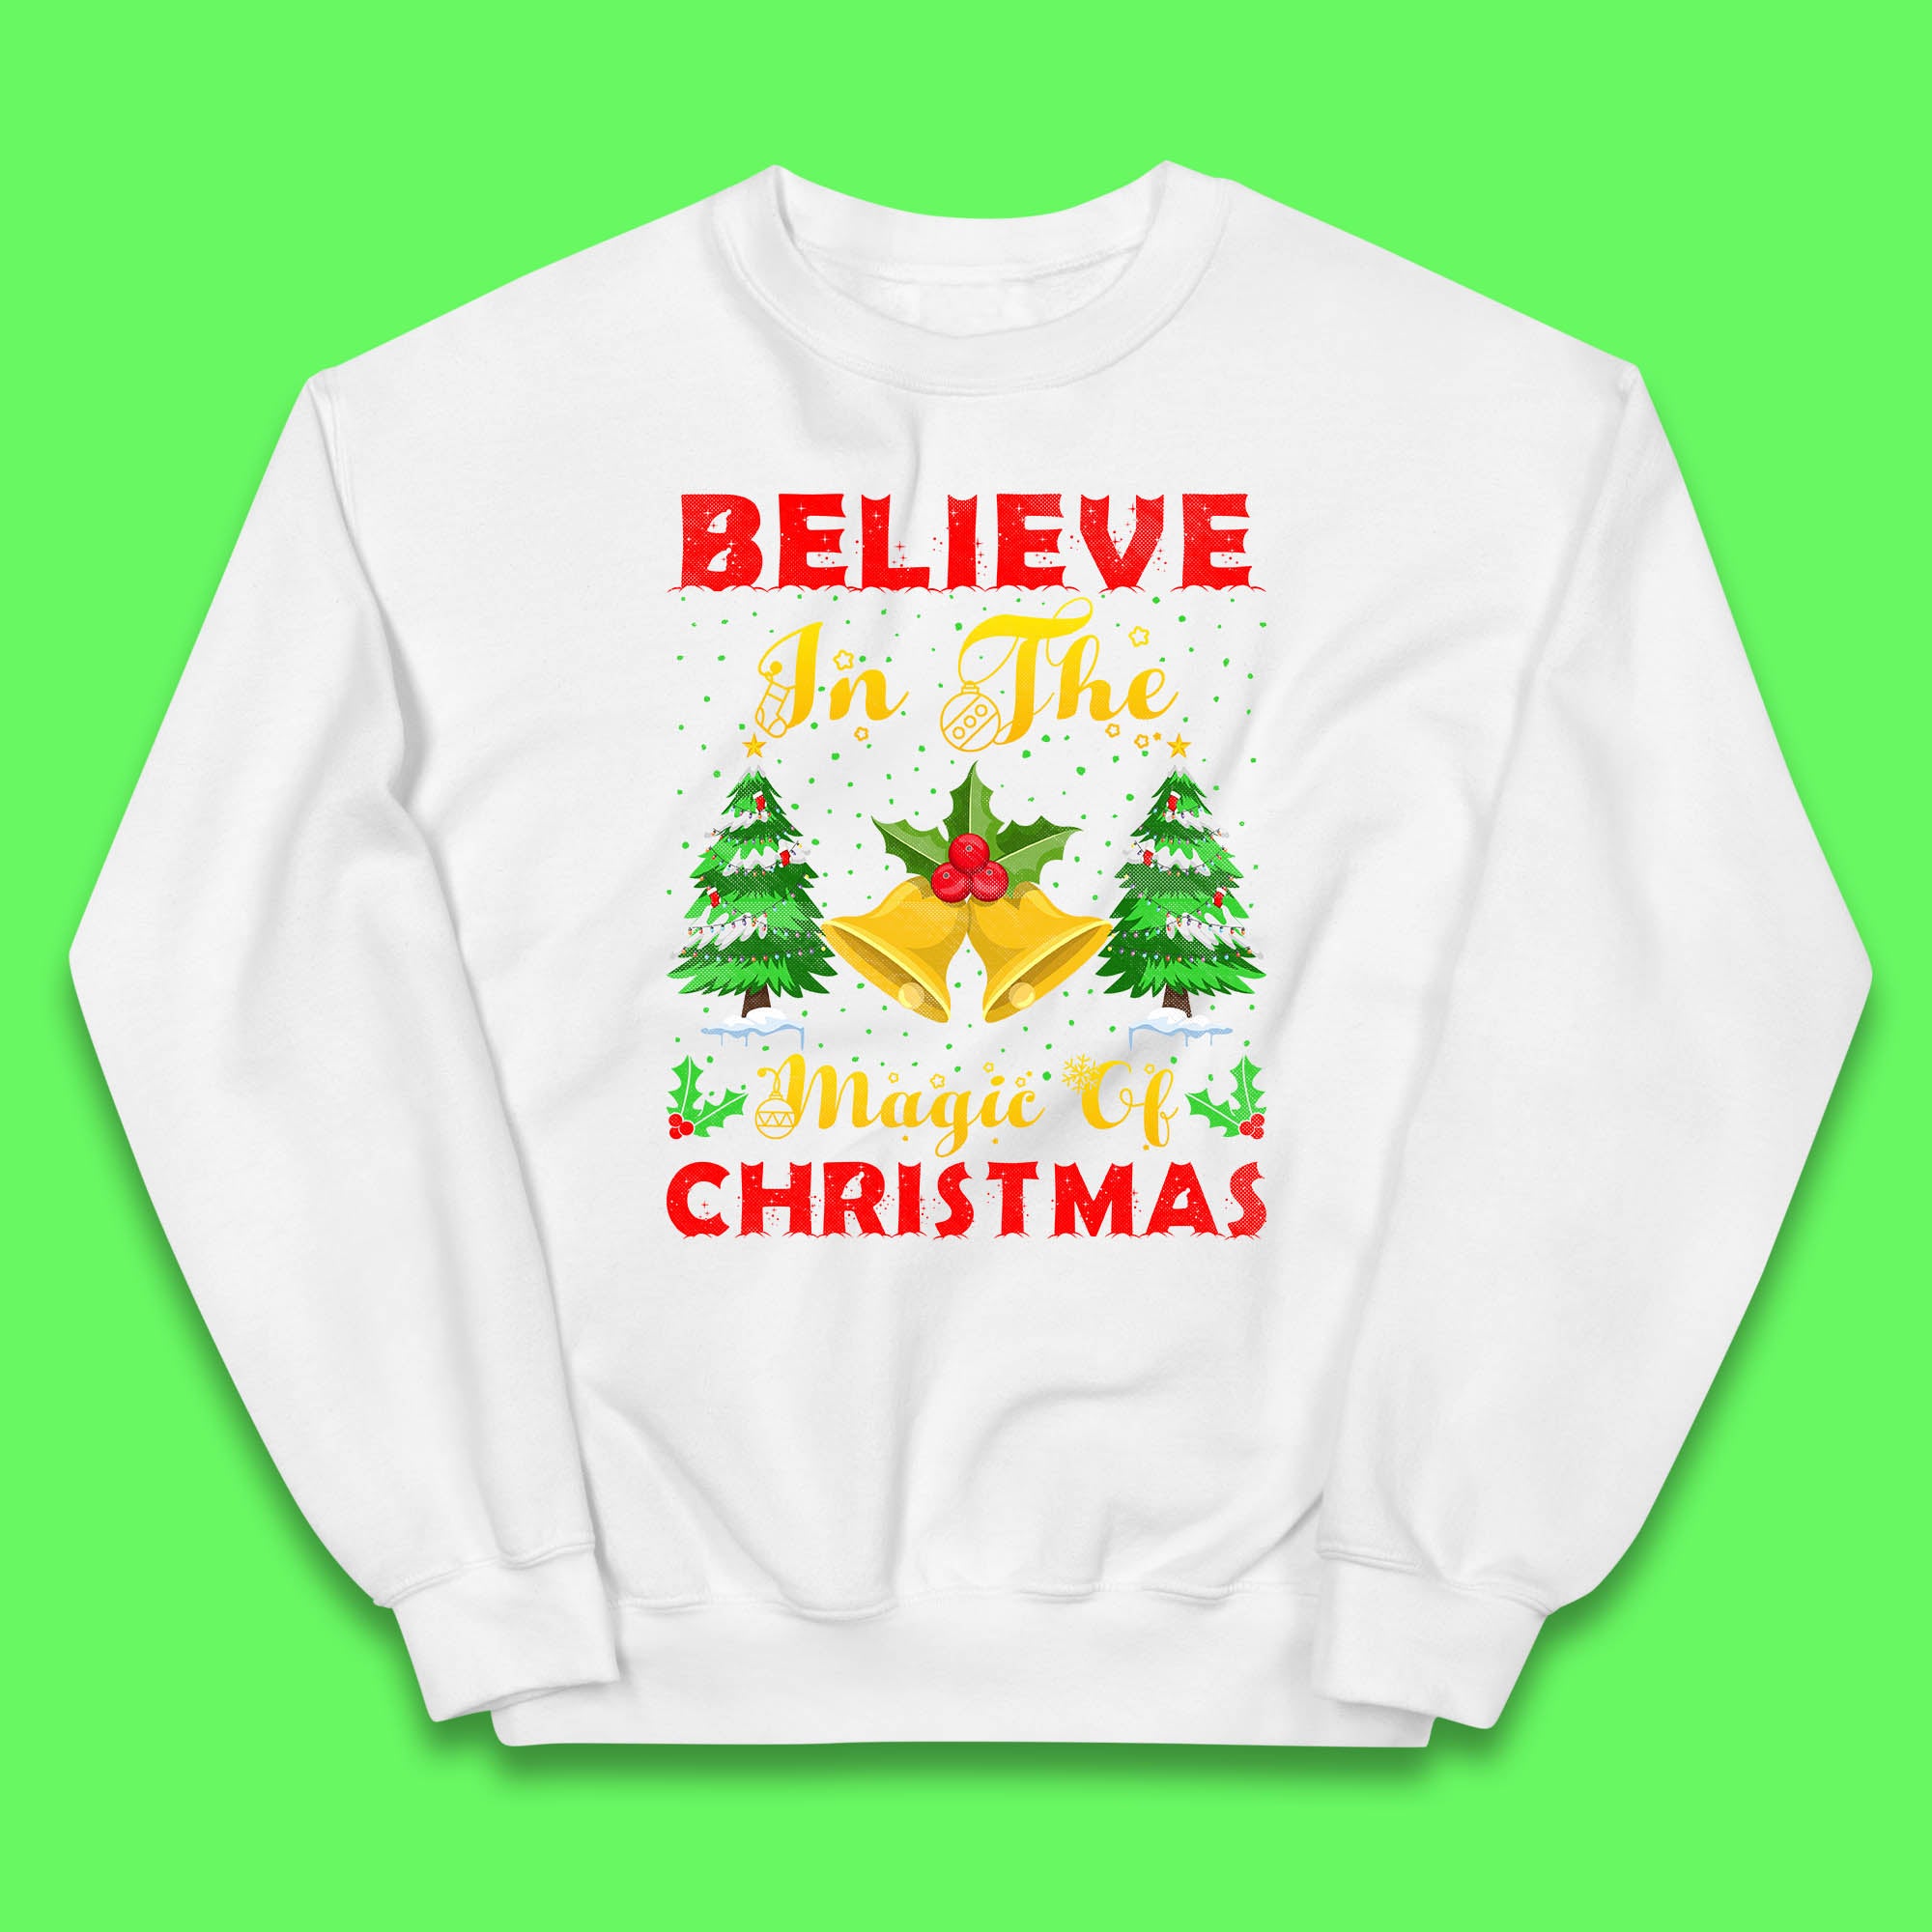 Believe In The Magic Of Christmas Funny Xmas Holiday Festive Kids Jumper